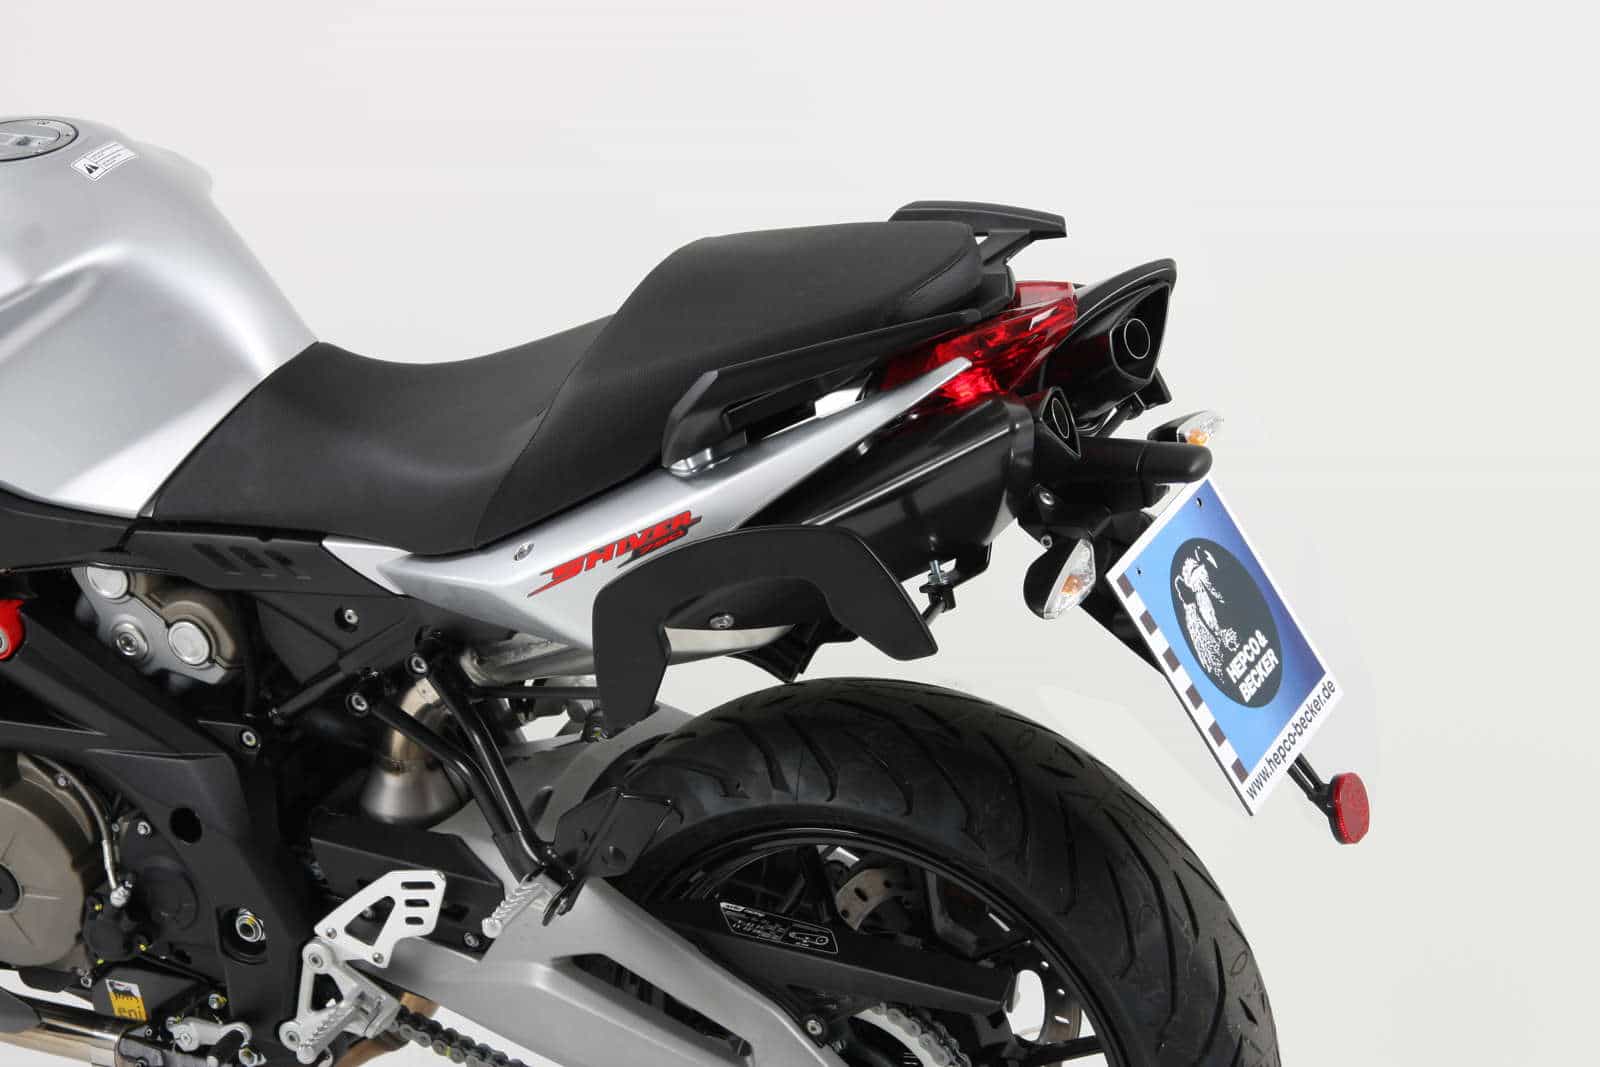 C-Bow sidecarrier for Aprilia SL 750 Shiver (2010-2016)